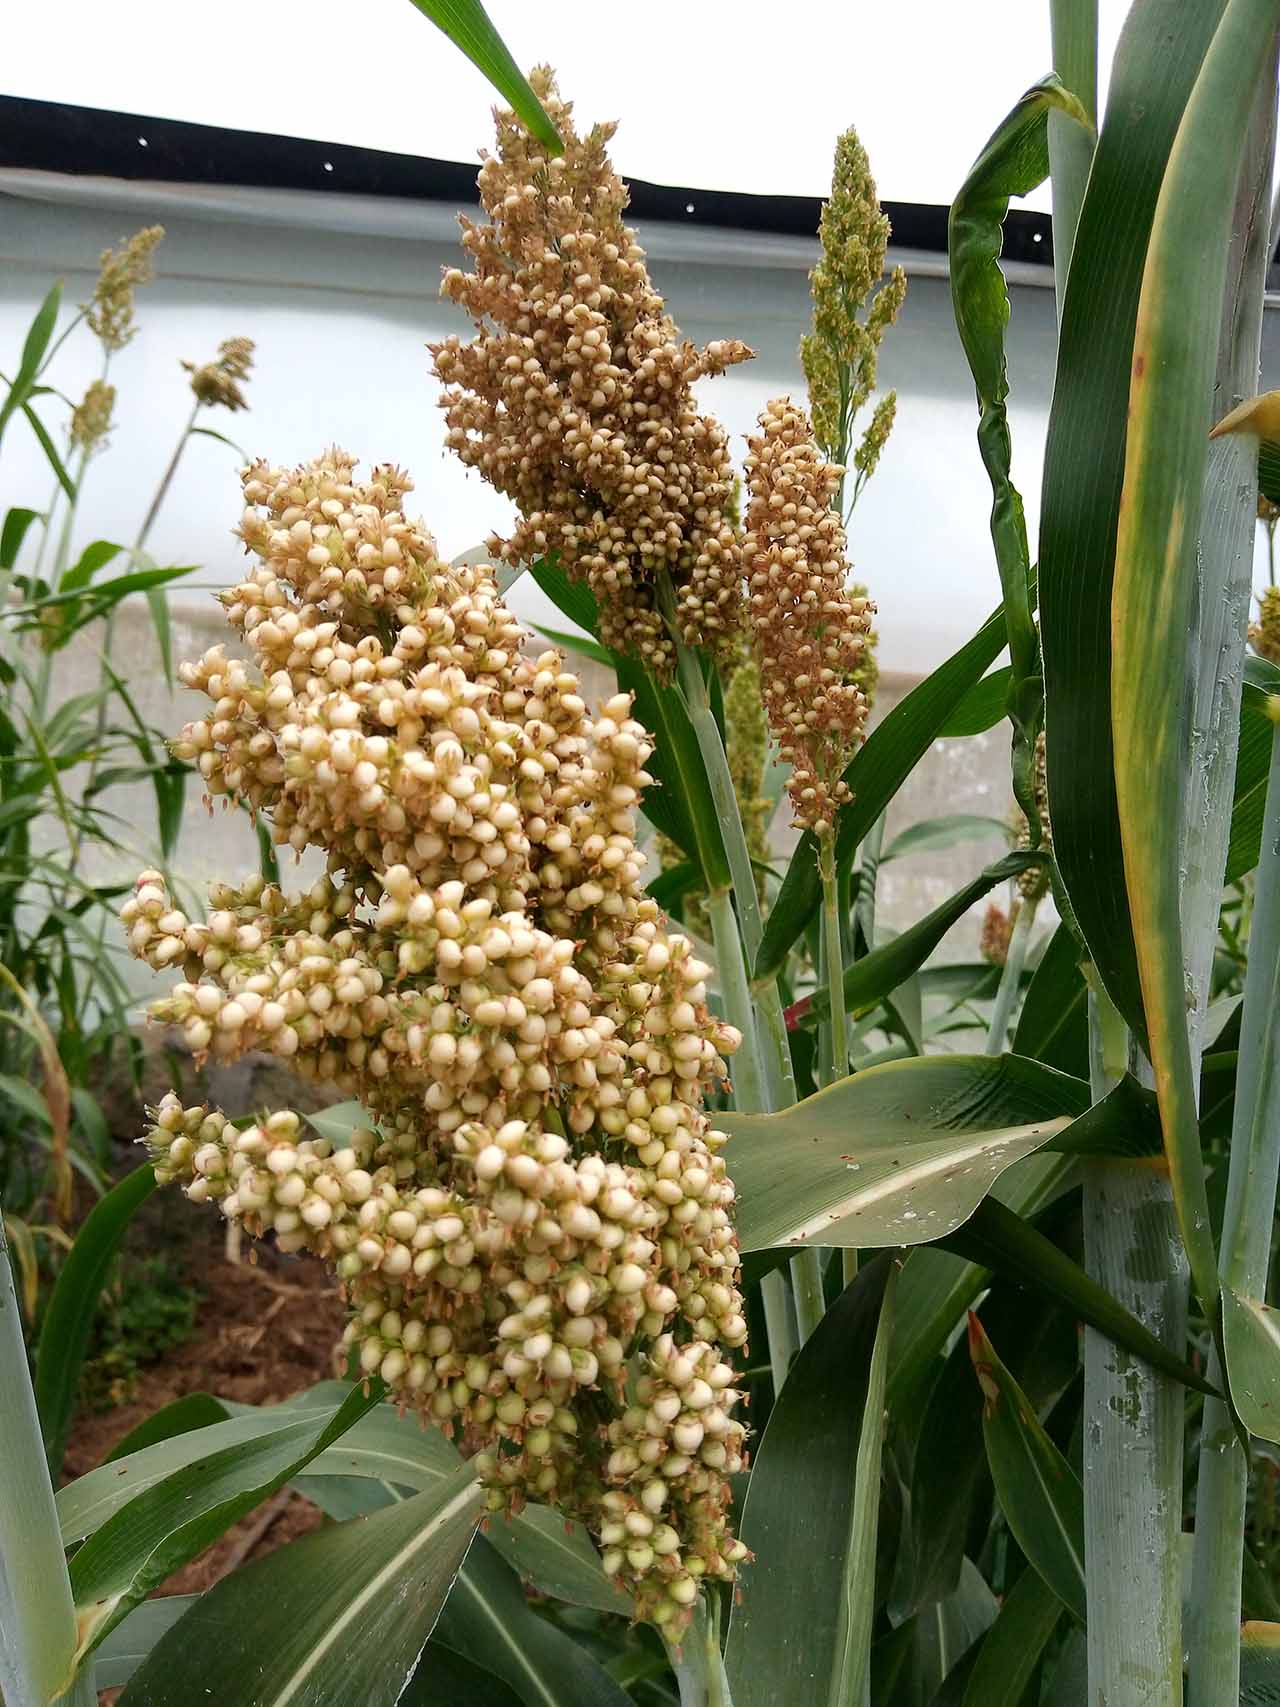 EUSH 1 Hybrid sorghum developed in collaboration with the East African Breweries Limited  (EABL), for malting and brewing.